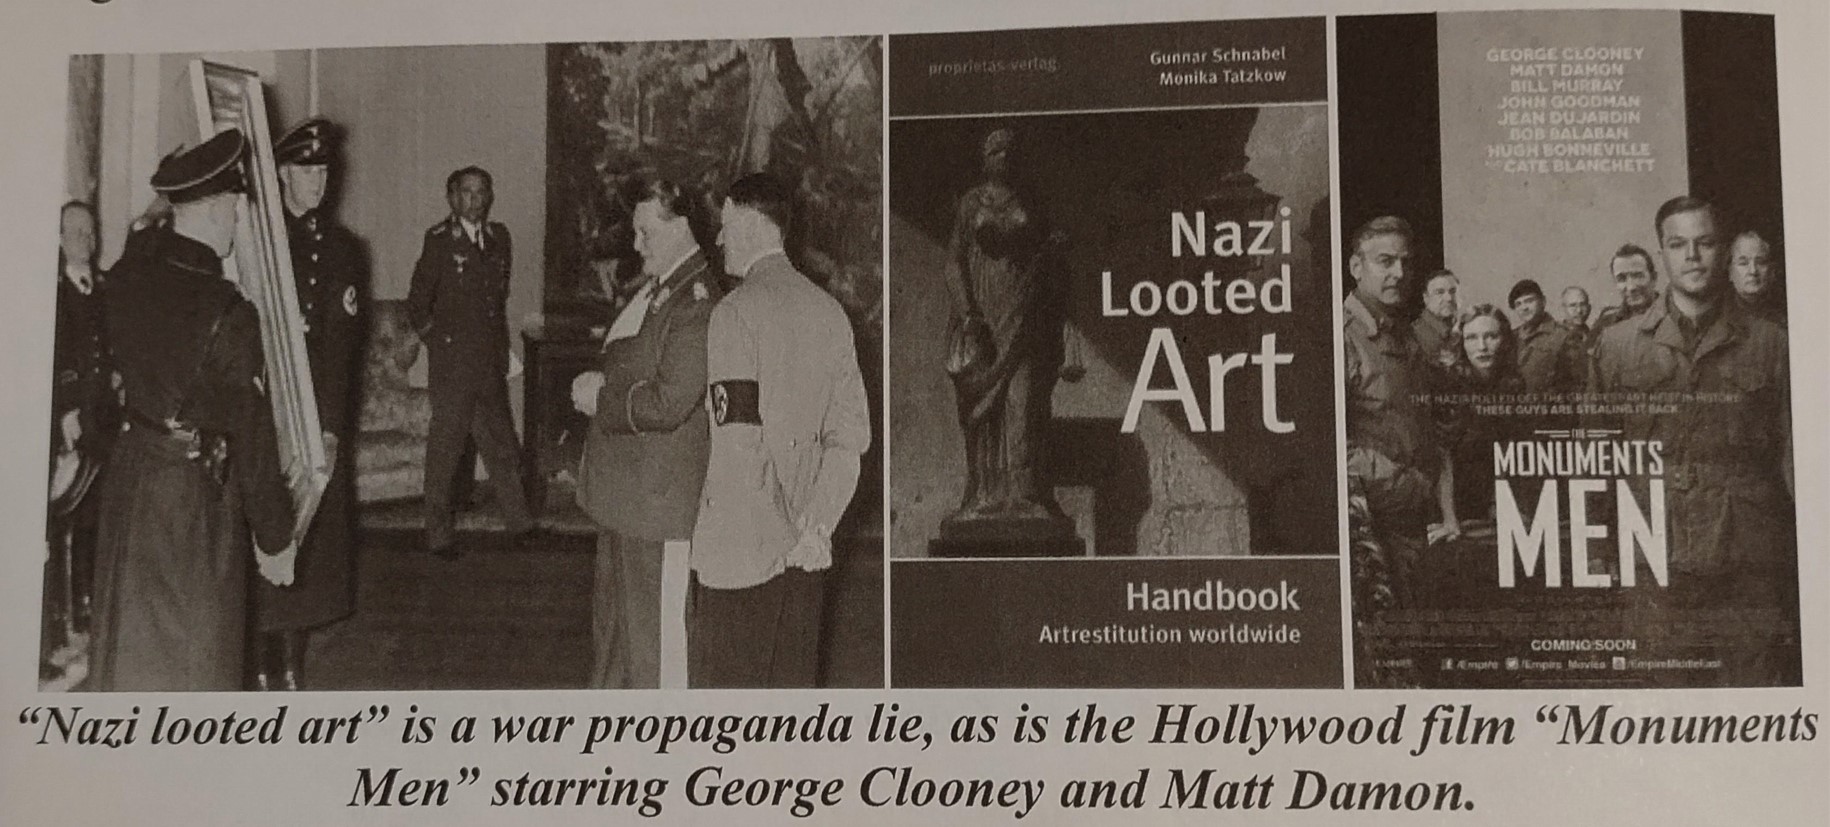 Art save by the Nazi